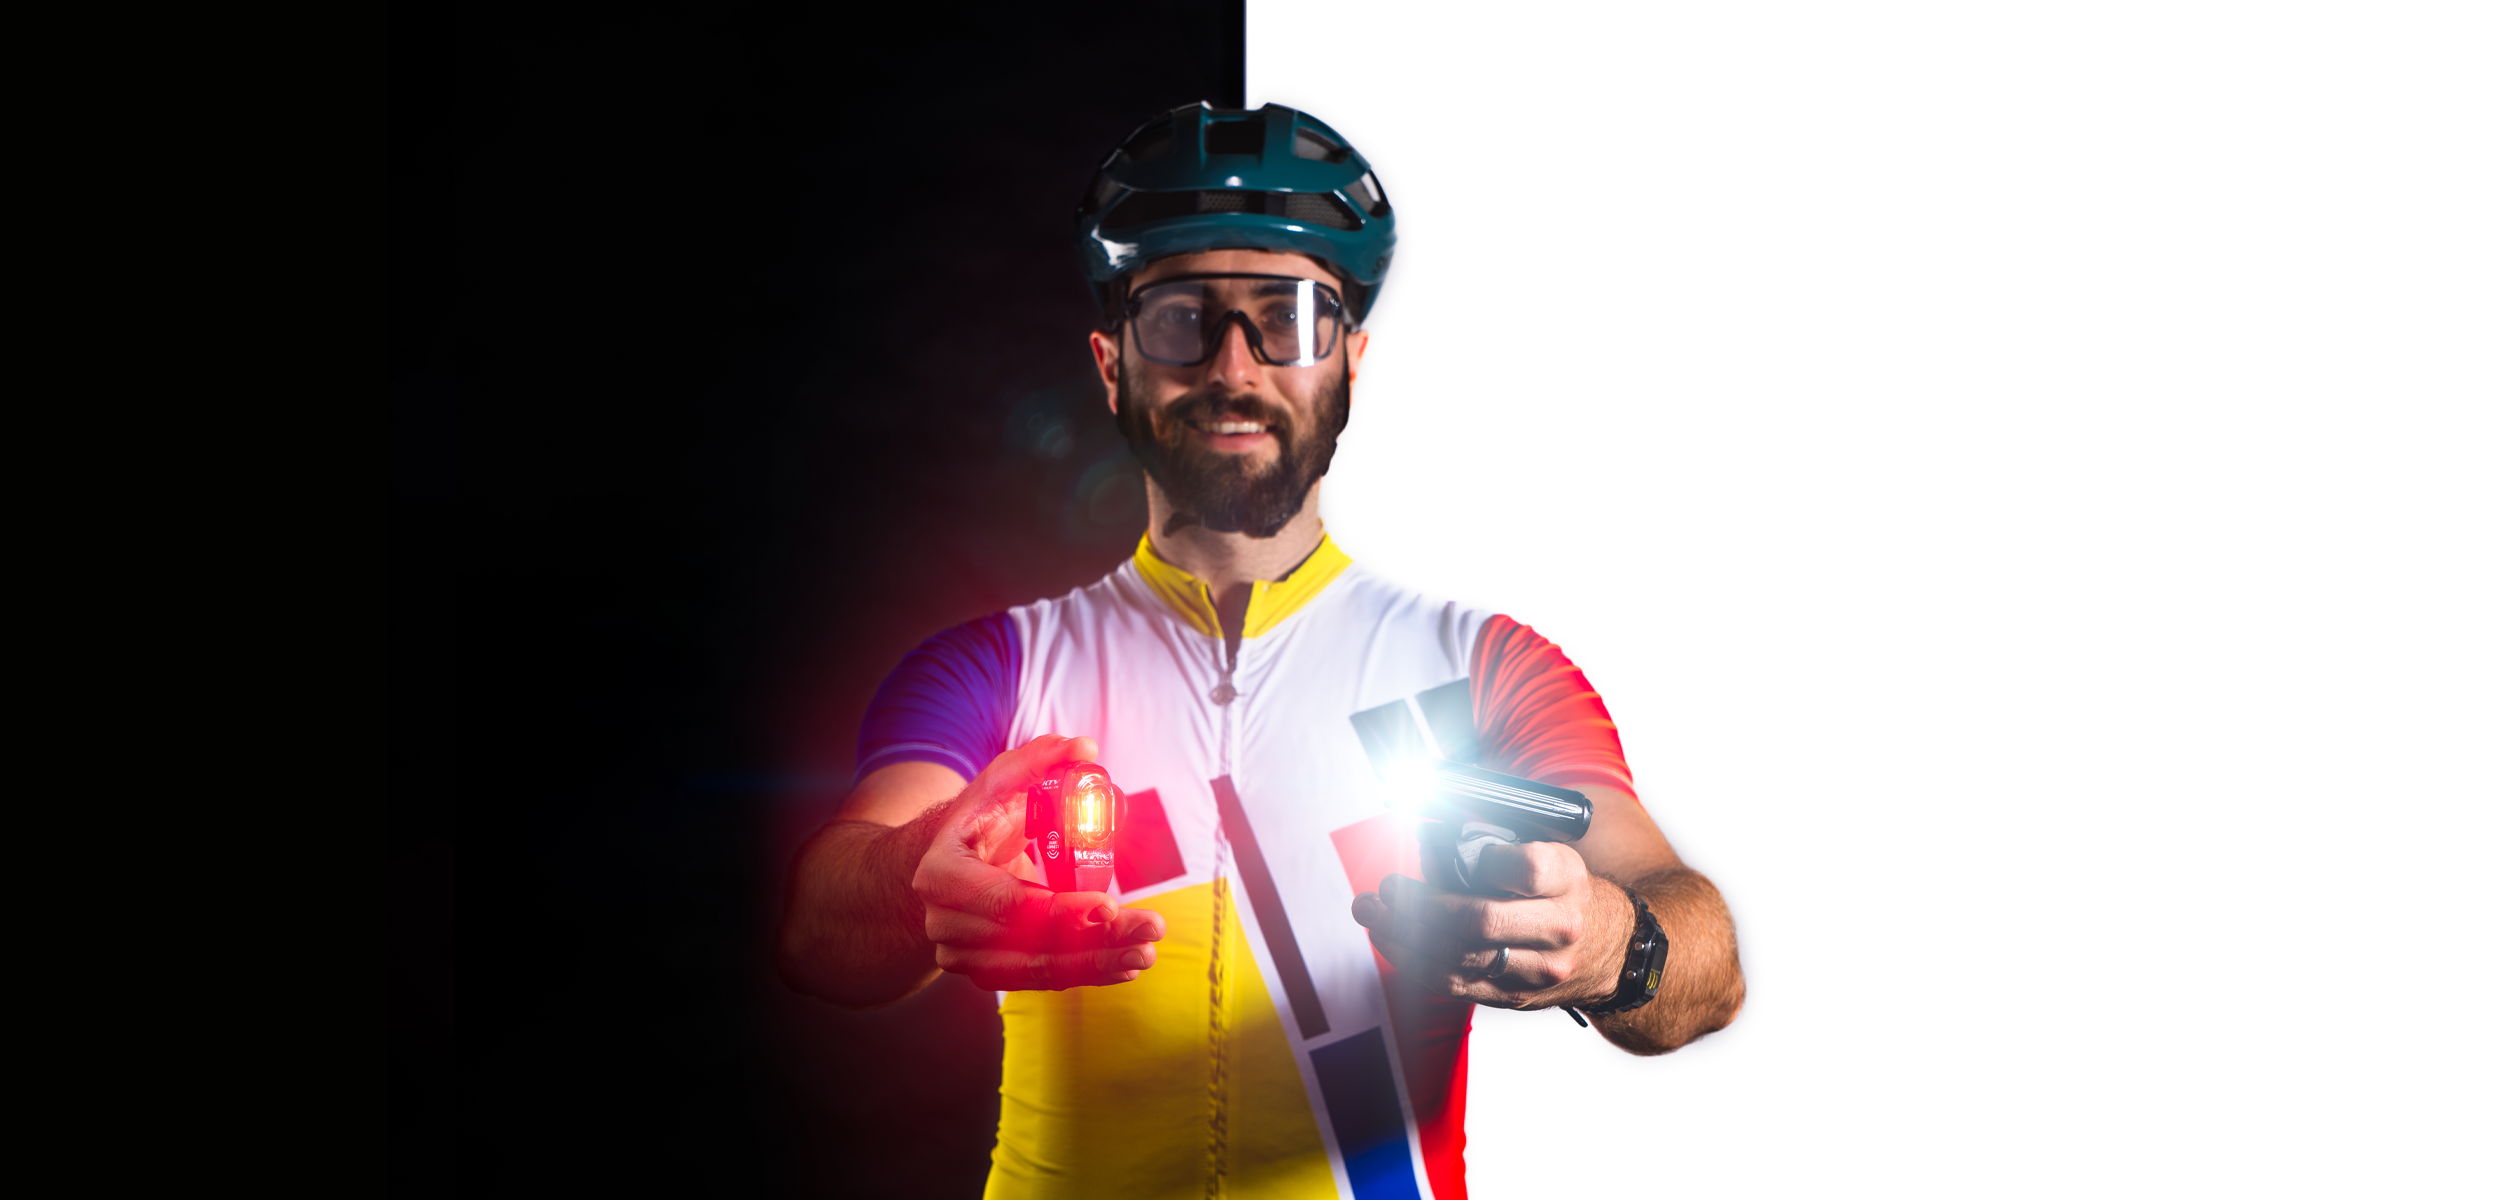 Road cyclist holding a front and rear light